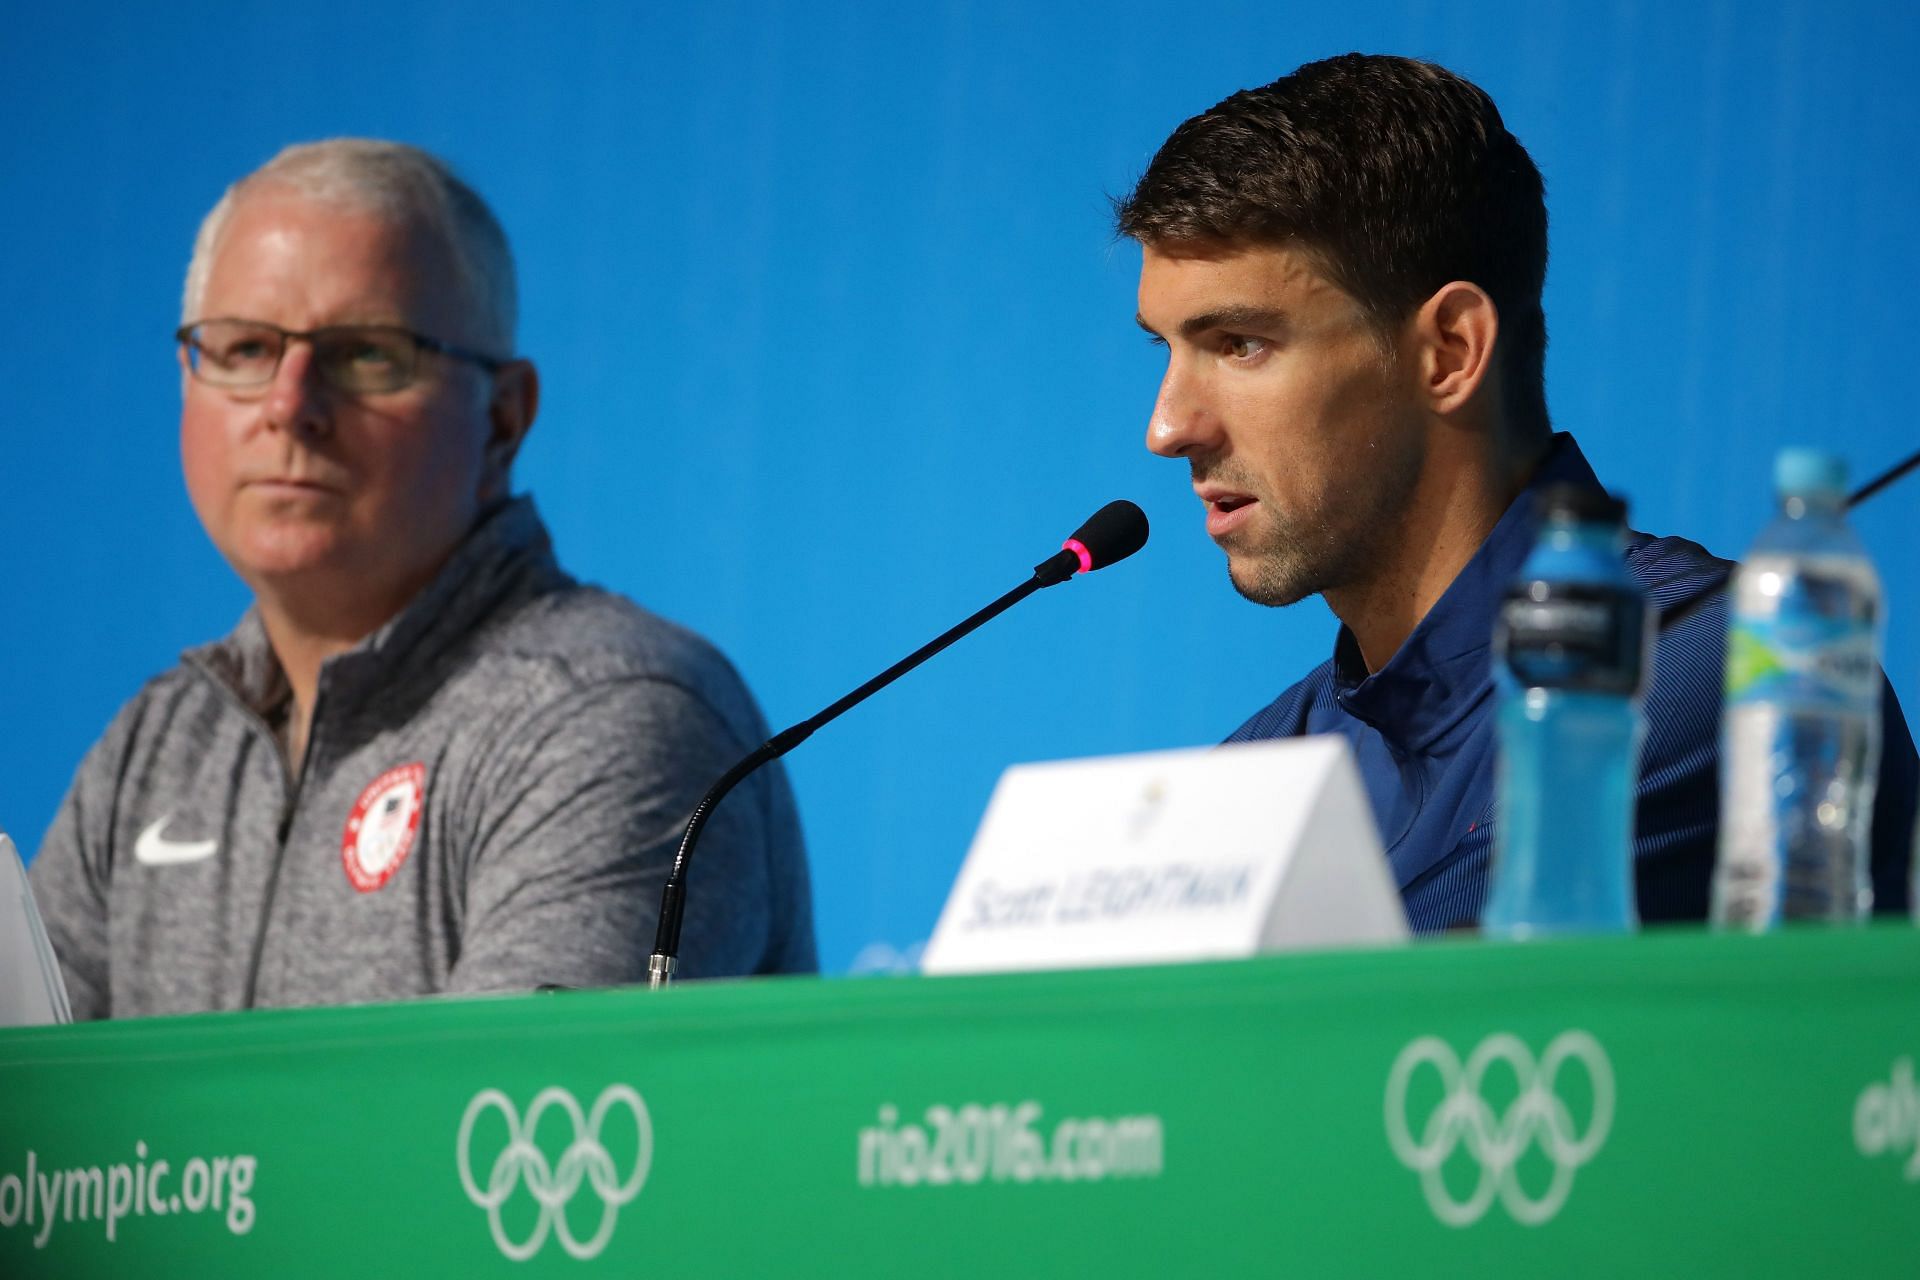 Bob Bowman and Michael Phelps of the United States speak with the media during a press conference at the Main Press Centre ahead of the Rio 2016 Olympic Games on August 3, 2016 in Rio de Janeiro, Brazil. (Photo by Chris Graythen/Getty Images)